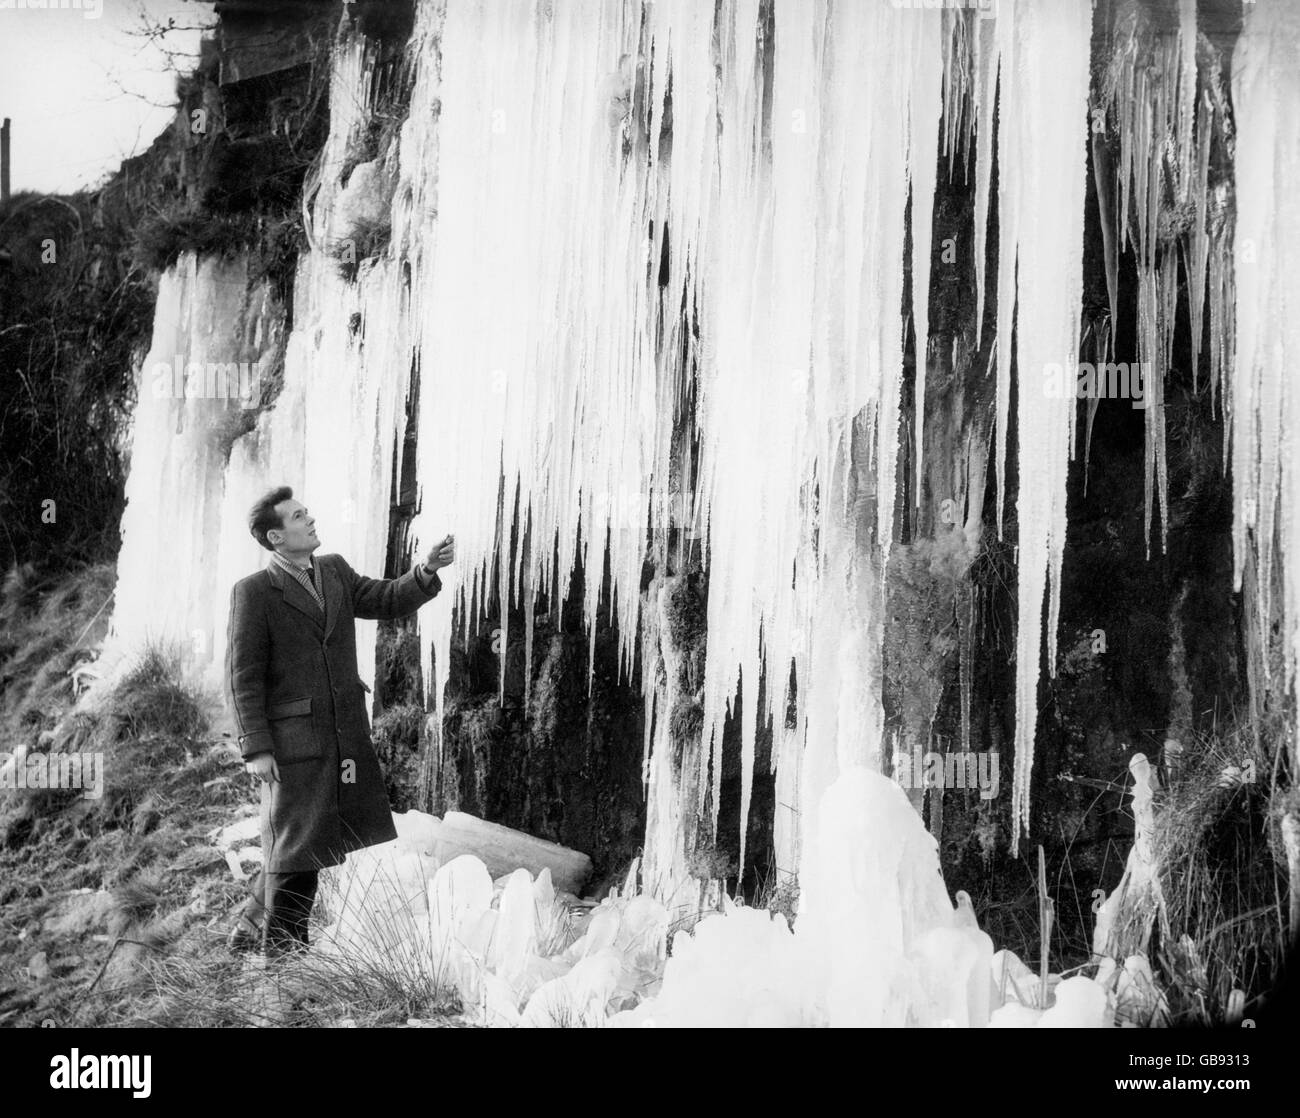 Britain's great freeze up has produced a spectacular curtain of icicles, 100 feet long, at Harwood, near Bolton, Lancashire. Stock Photo